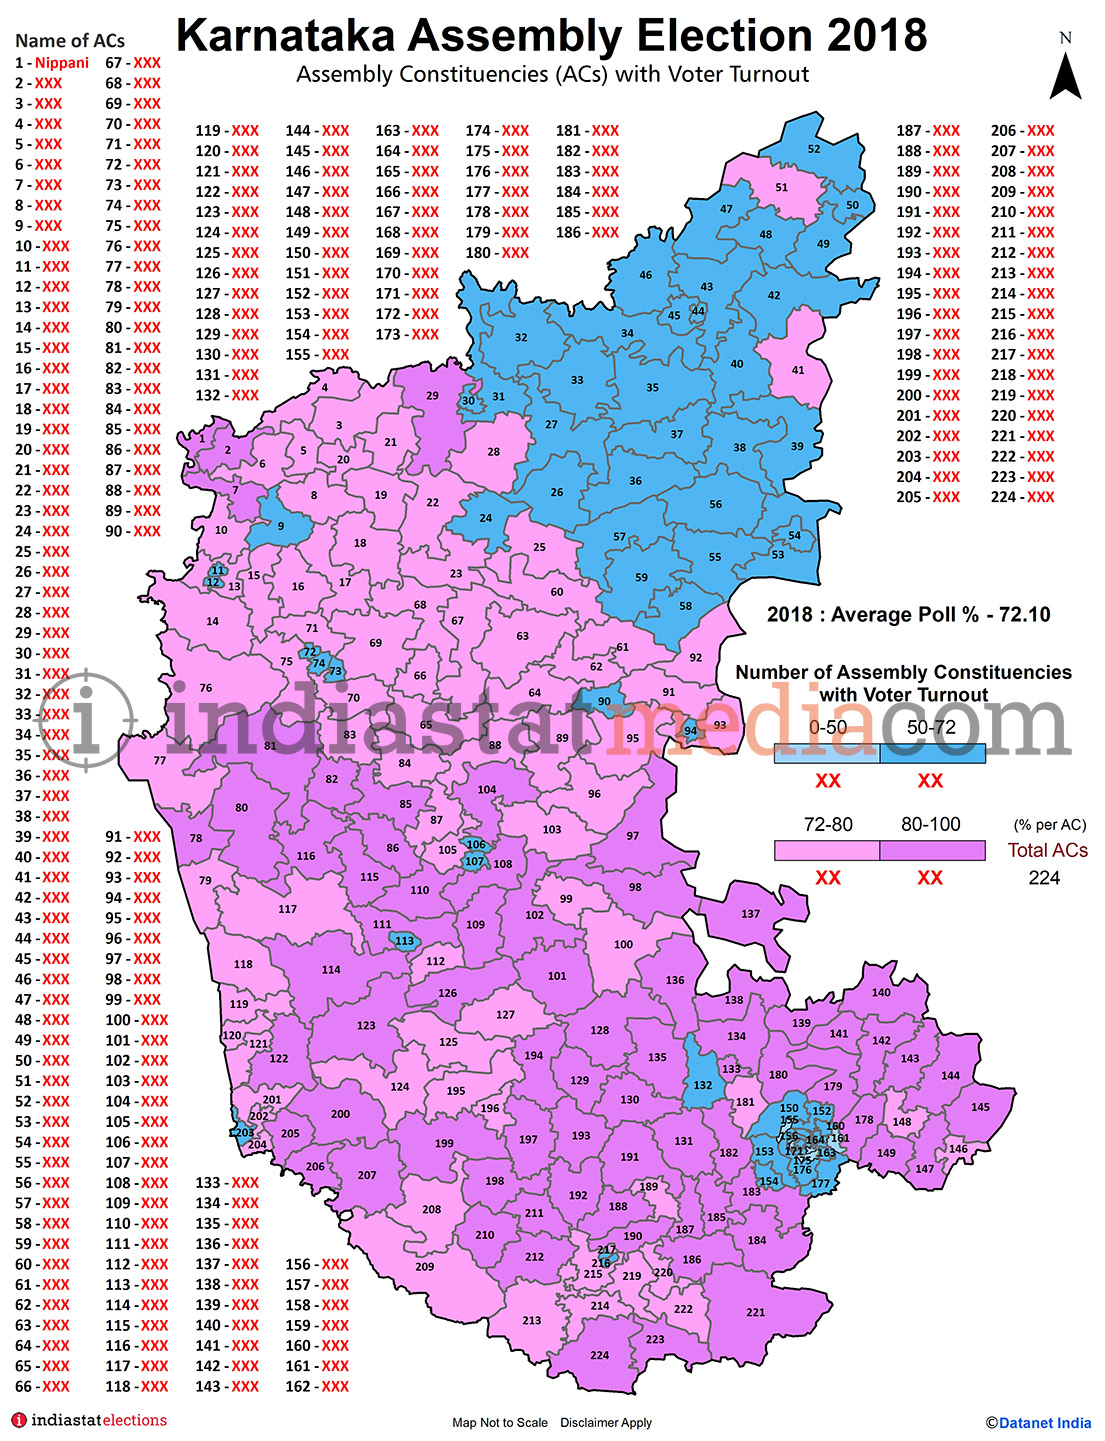 Assembly Constituencies (ACs) with Voter Turnout in Karnataka (Assembly Election - 2018)